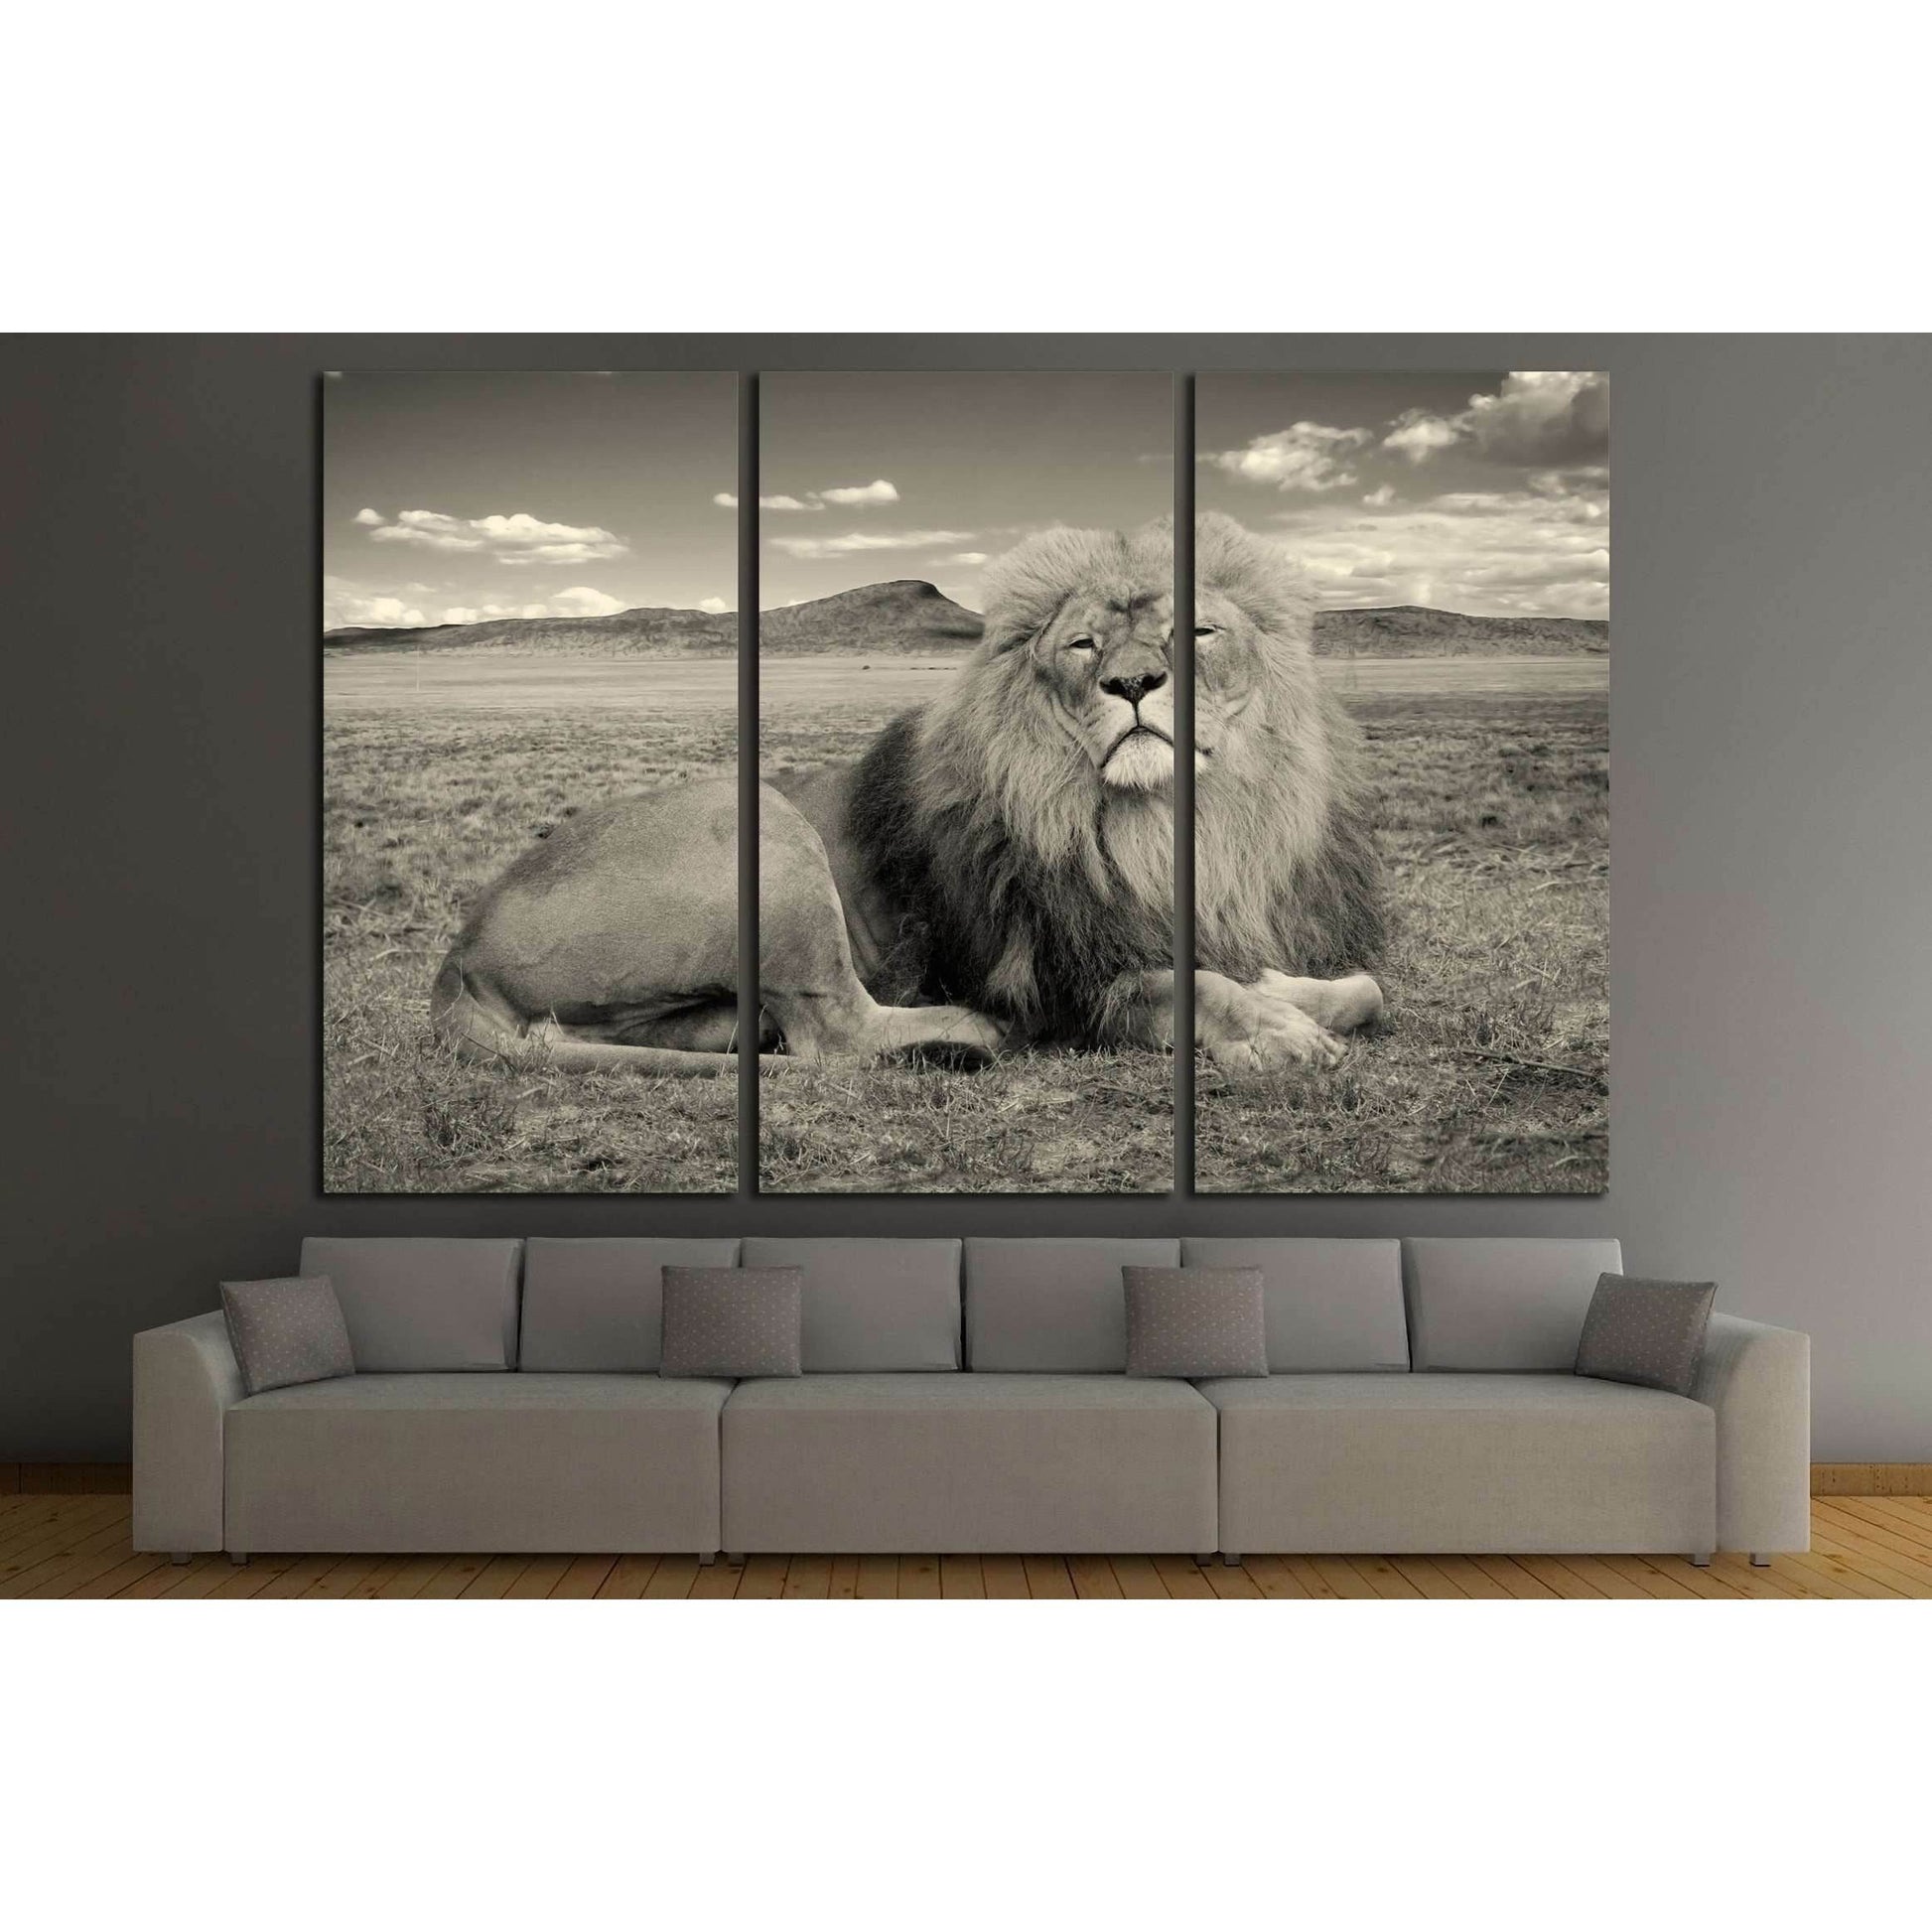 Sepia Lion Portrait Wall Art PrintDecorate your walls with a stunning Sepia Lion Canvas Art Print from the world's largest art gallery. Choose from thousands of Lion artworks with various sizing options. Choose your perfect art print to complete your home